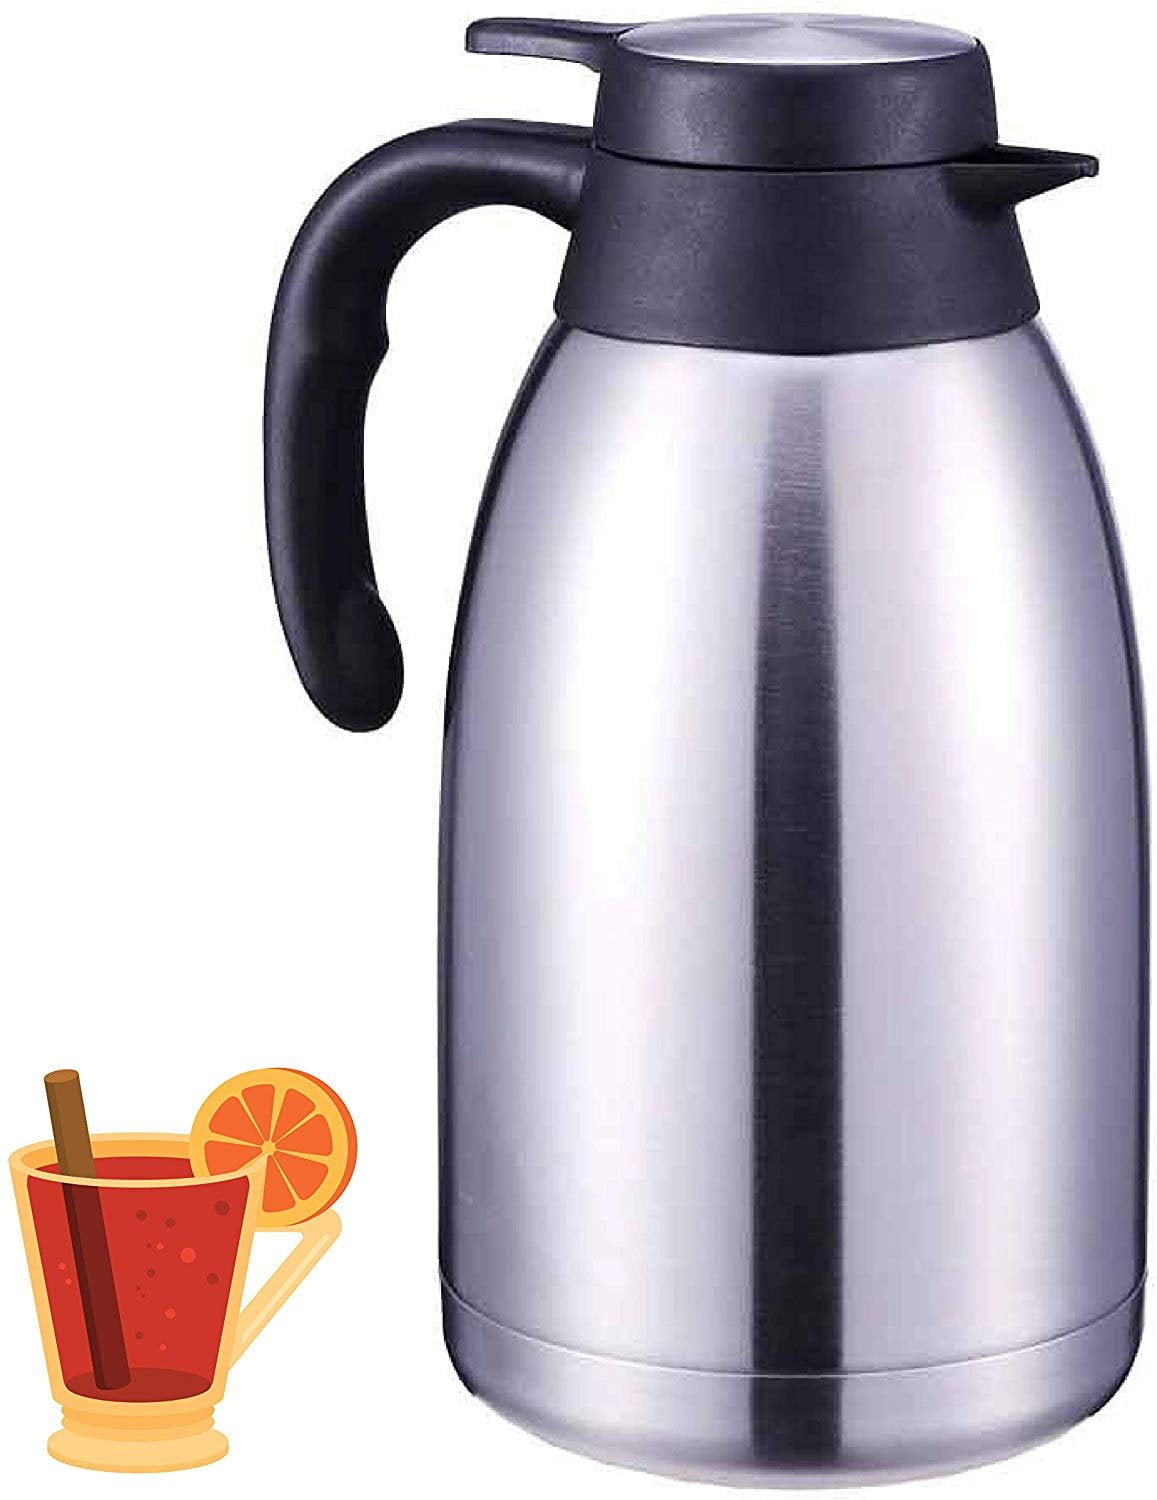 12 Hour Heat Retention 3 Liter Tea BEYONDA Double Walled Large Insulated Vacuum Flask Water and Coffee Dispense 101OZ Stainless Steel Thermal Insulated Carafes Thermal Coffee Carafe